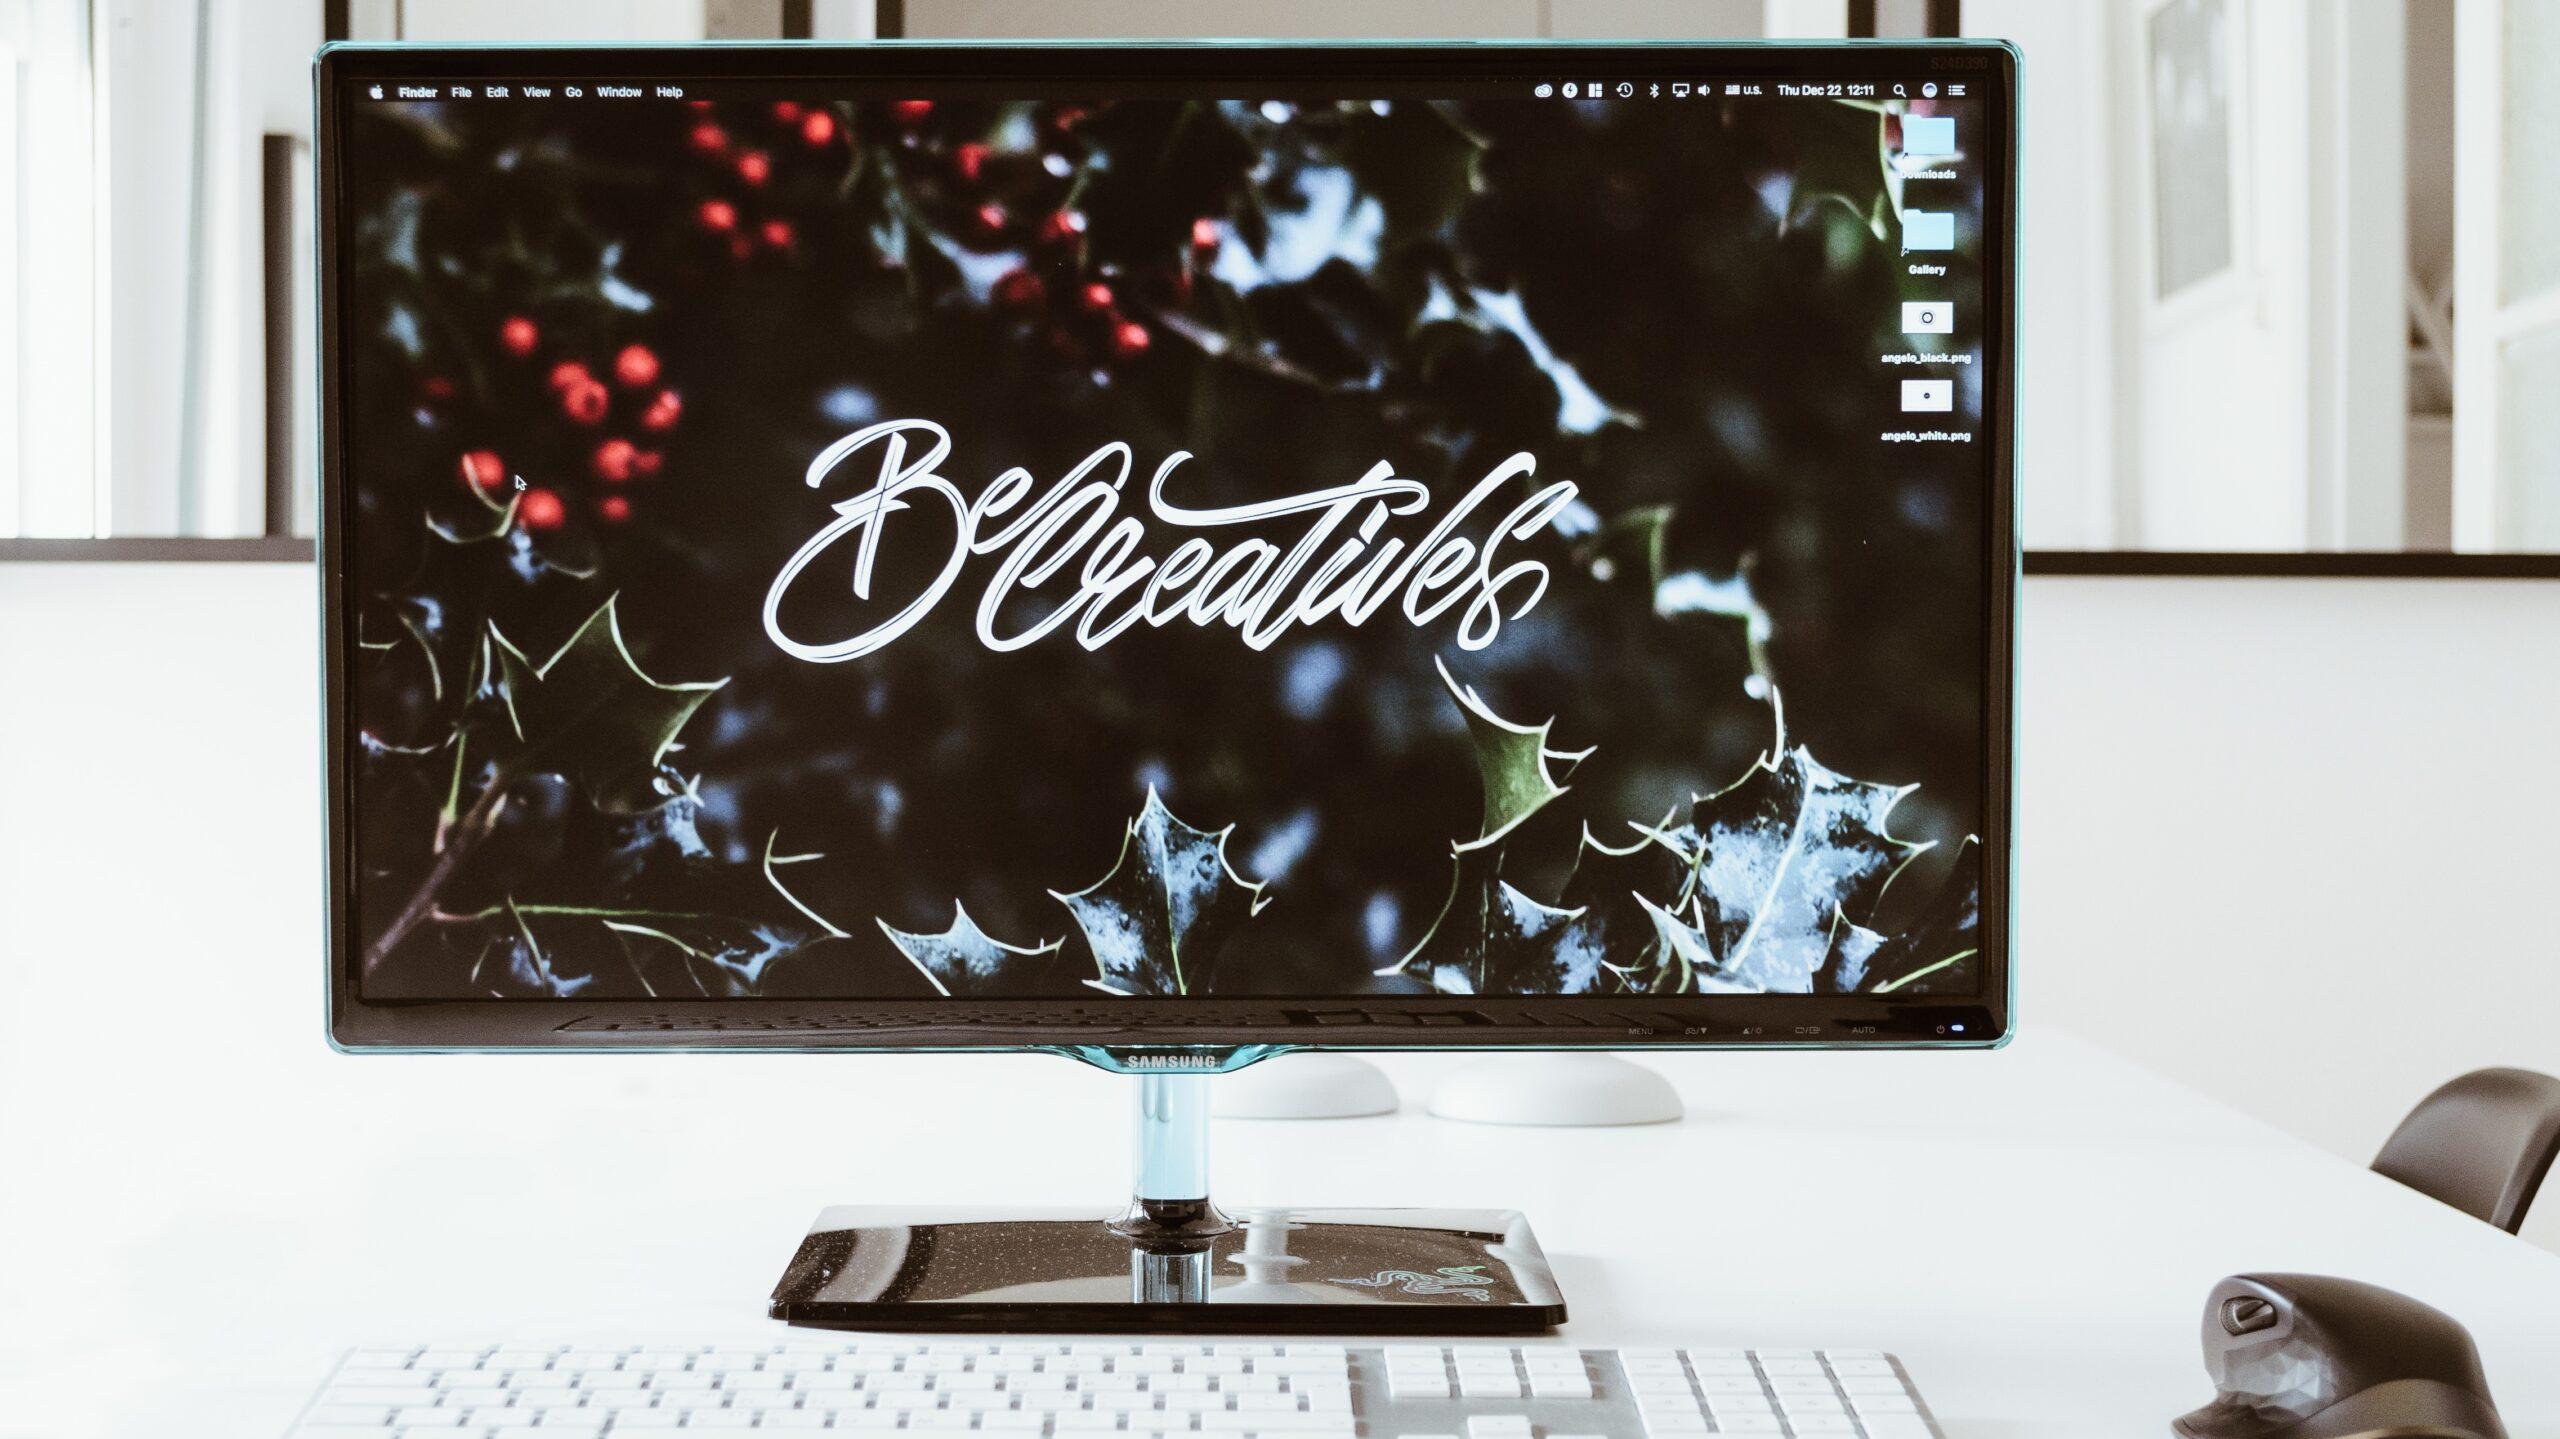 Website page displaying the words 'Be creative' against a backdrop of plants.